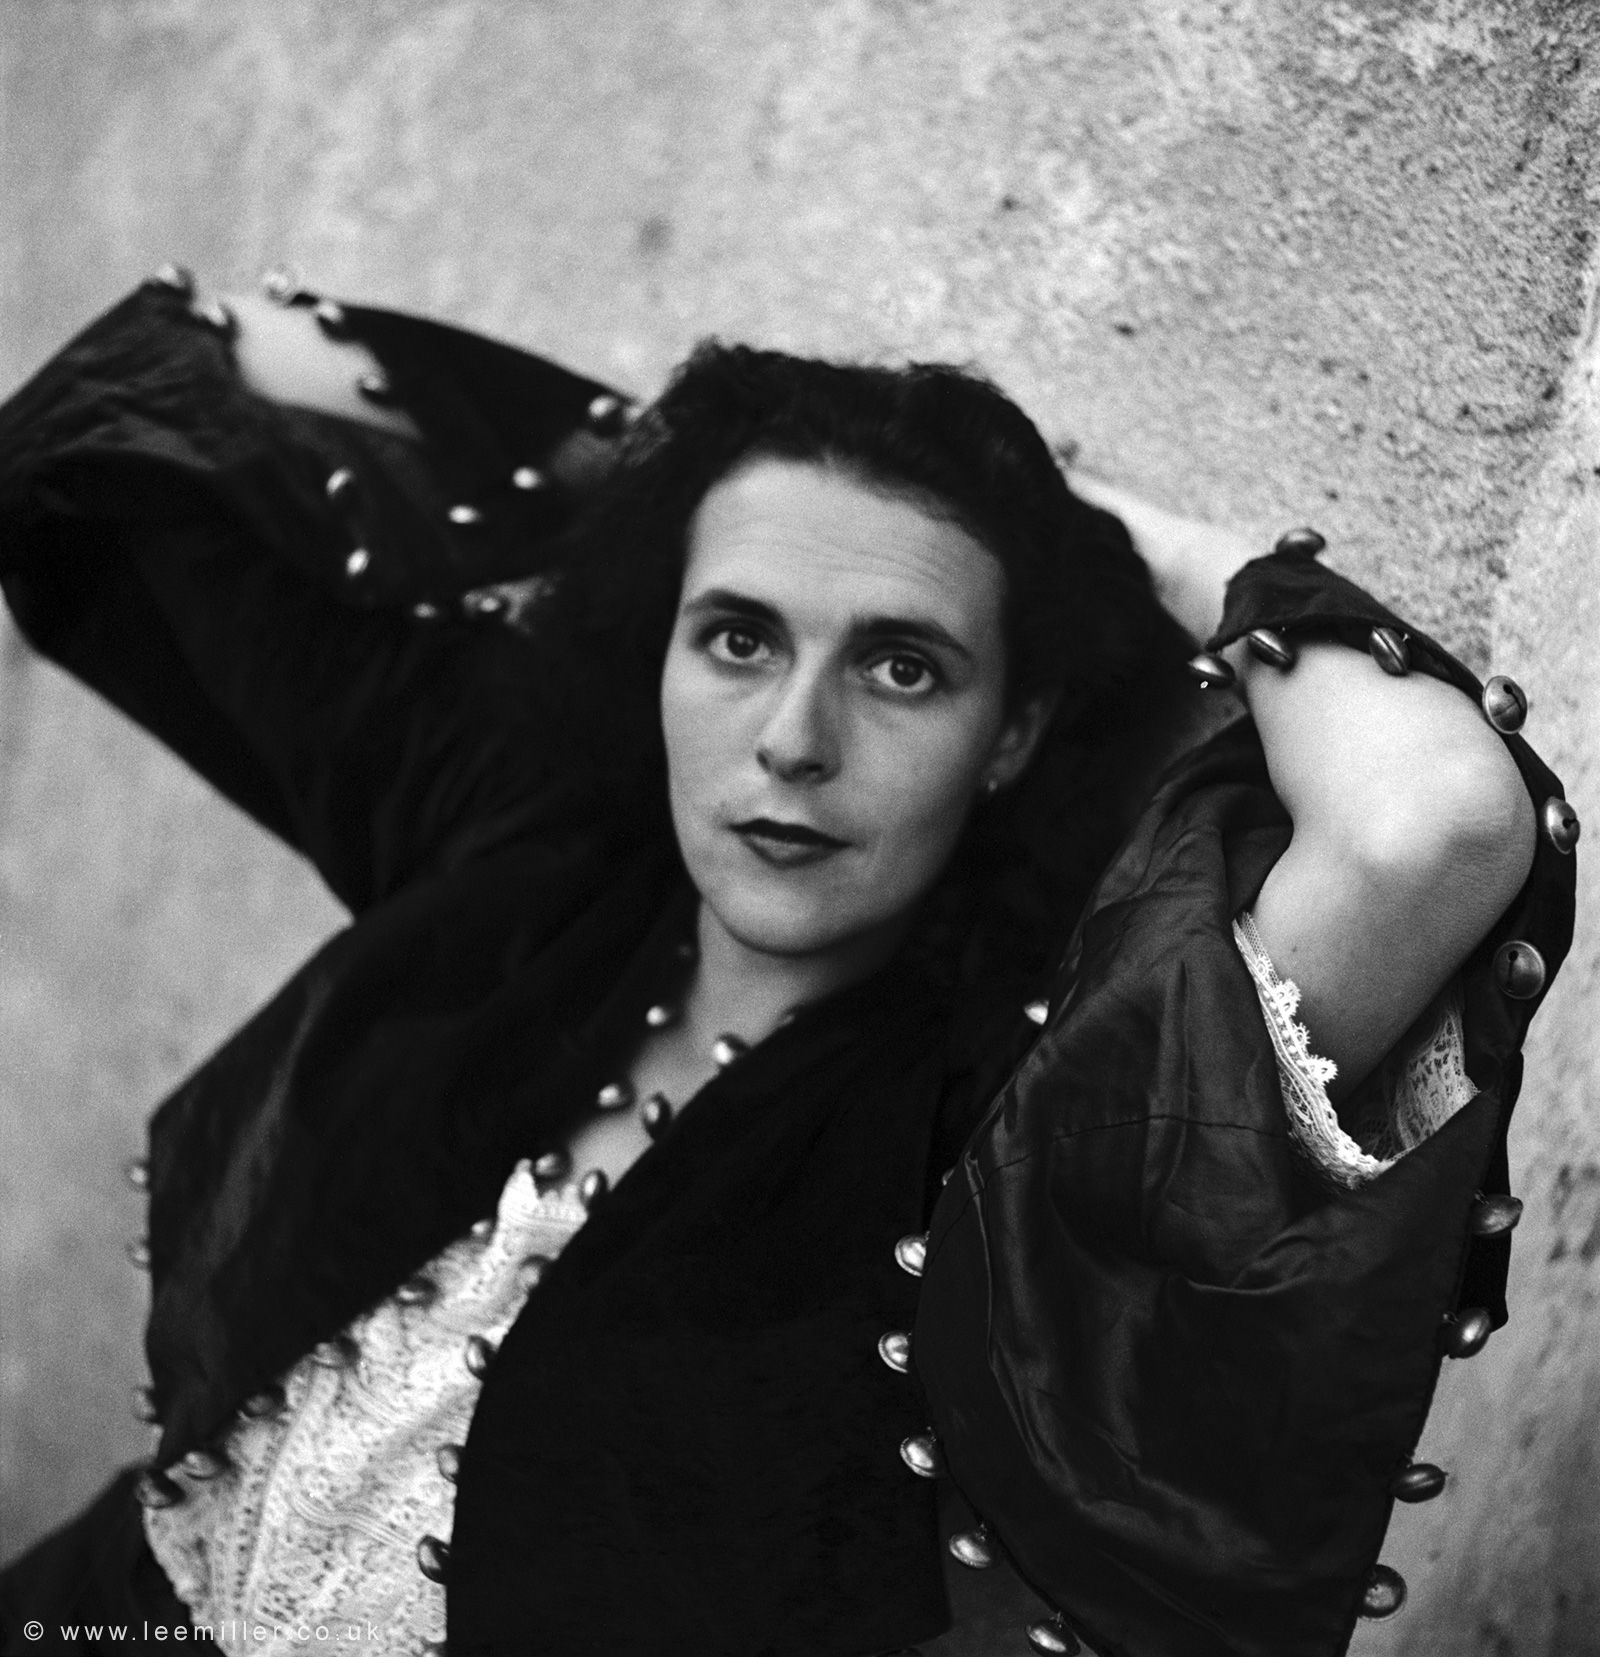 Miller photographed the artist Leonora Carrington outside of the home she shared with Max Ernst.